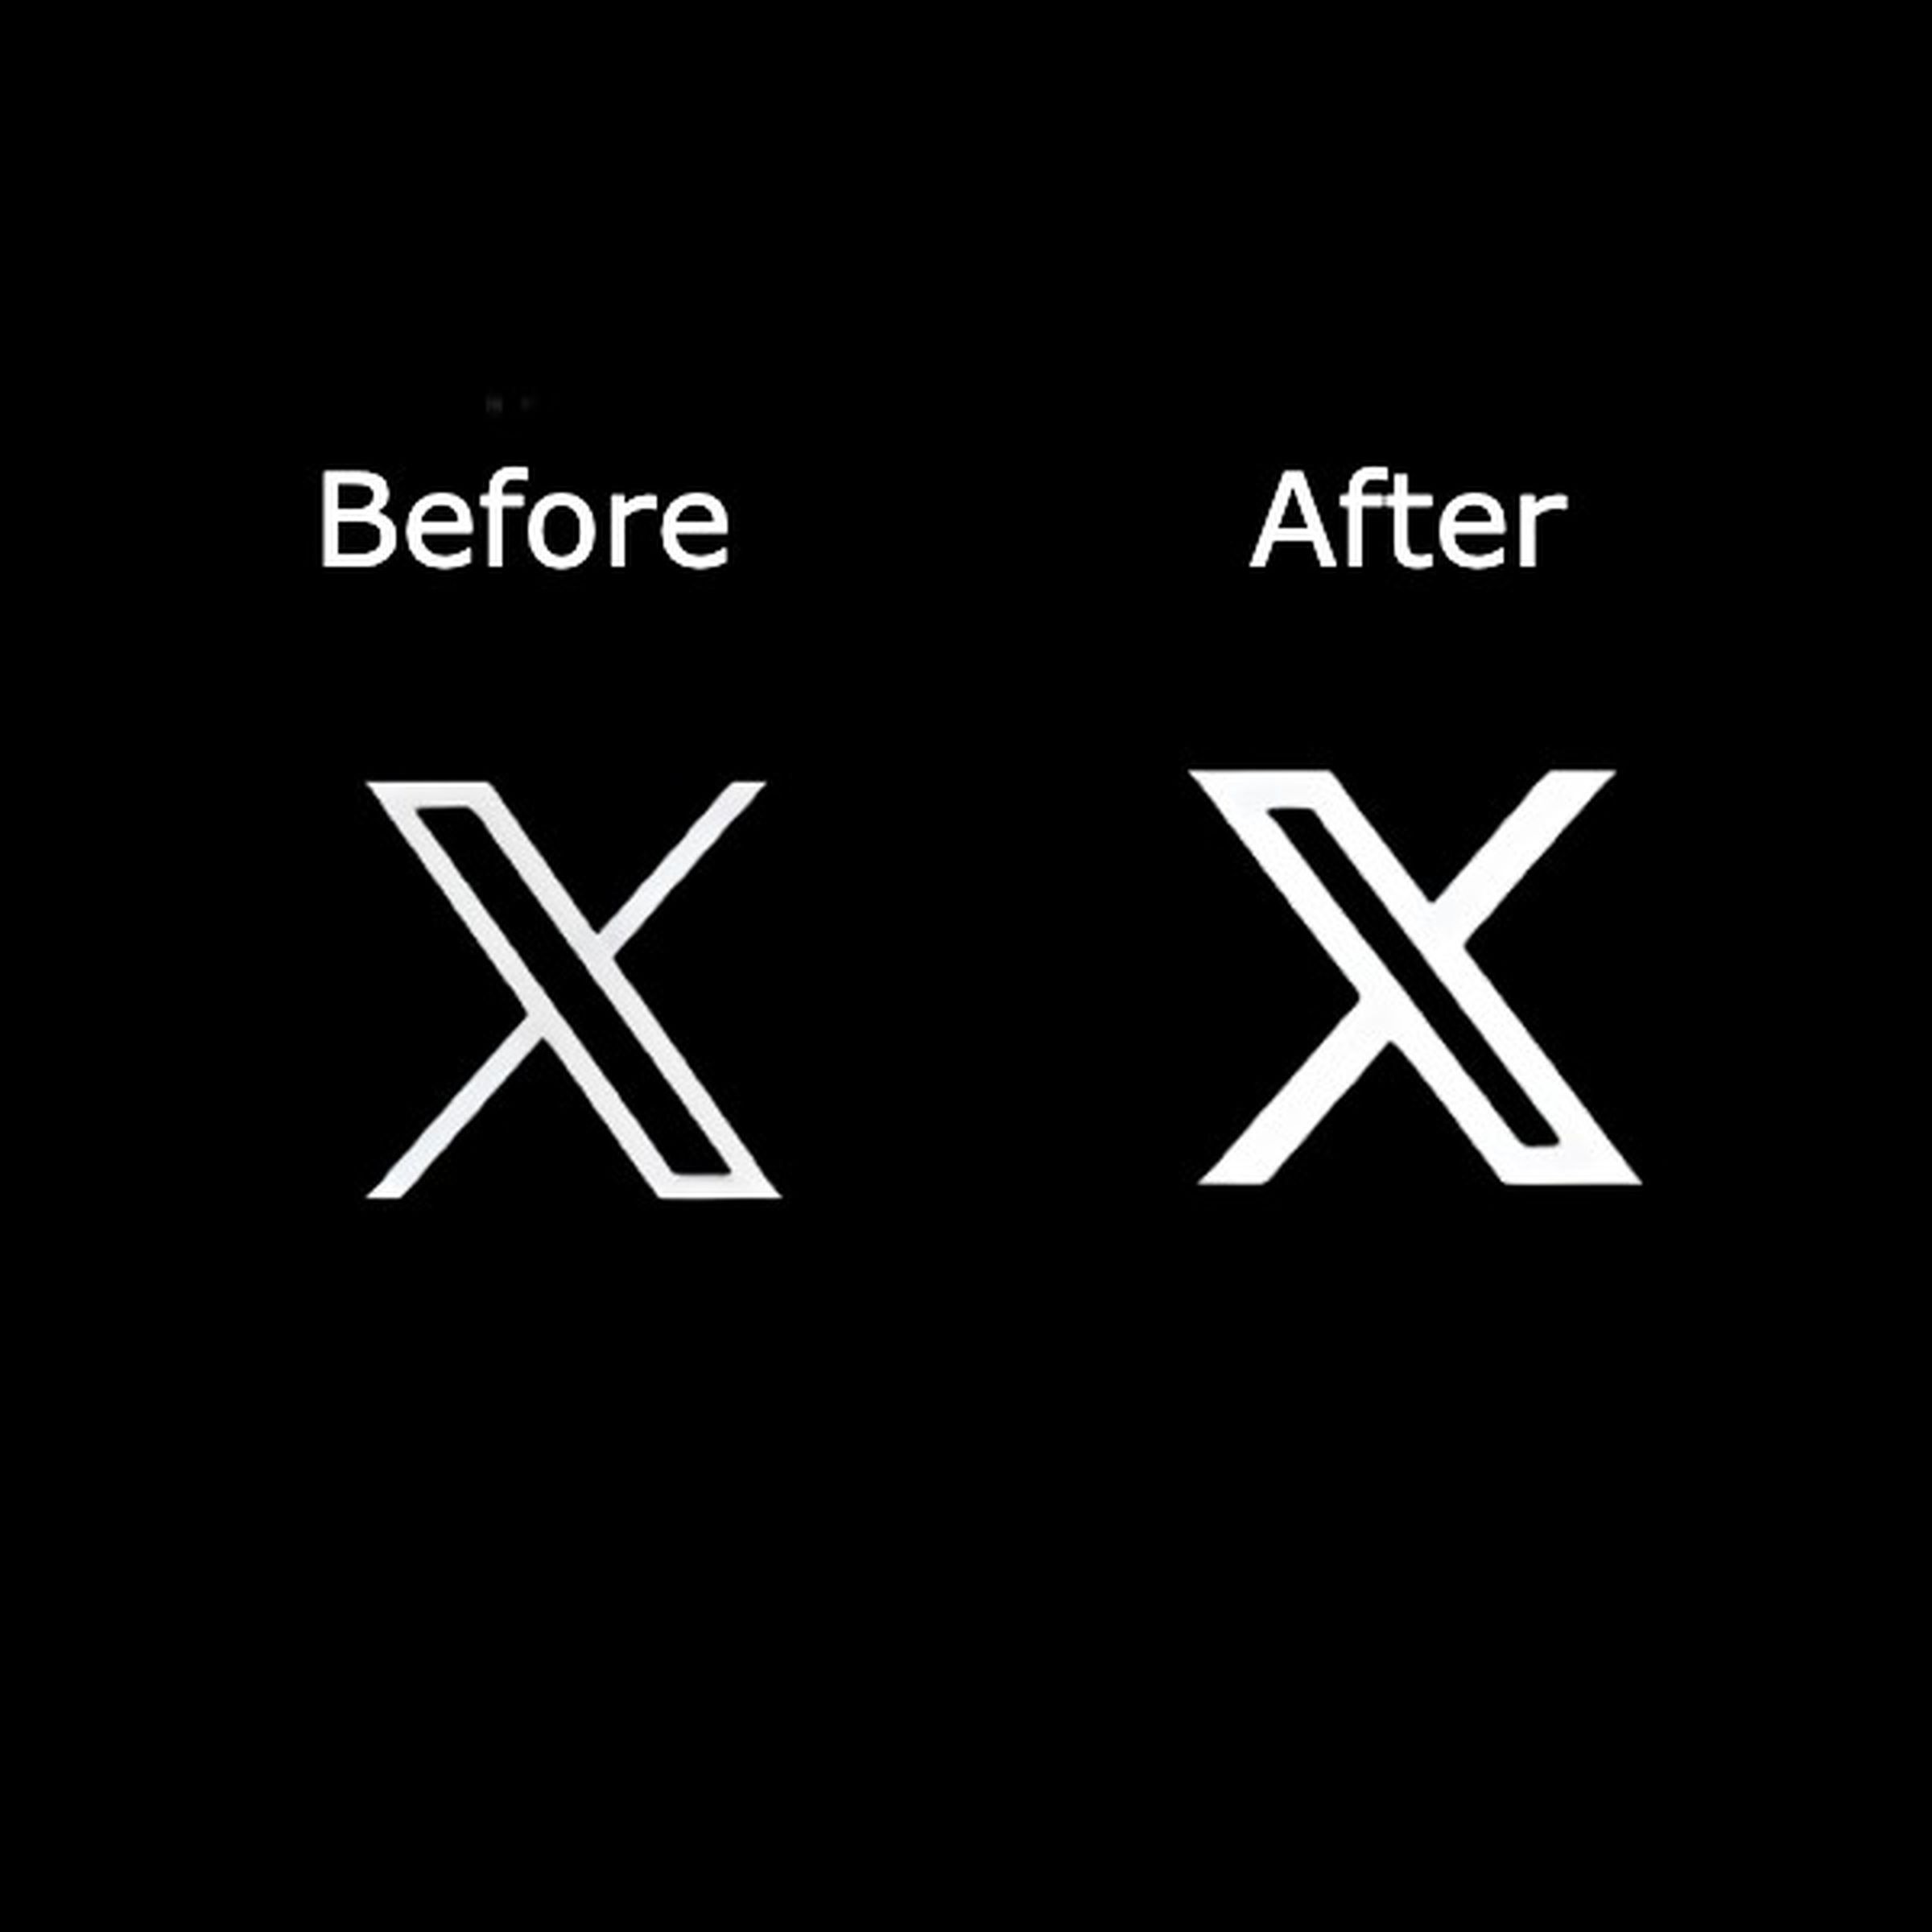 An image showing a before and after of Twitter’s “X” logo